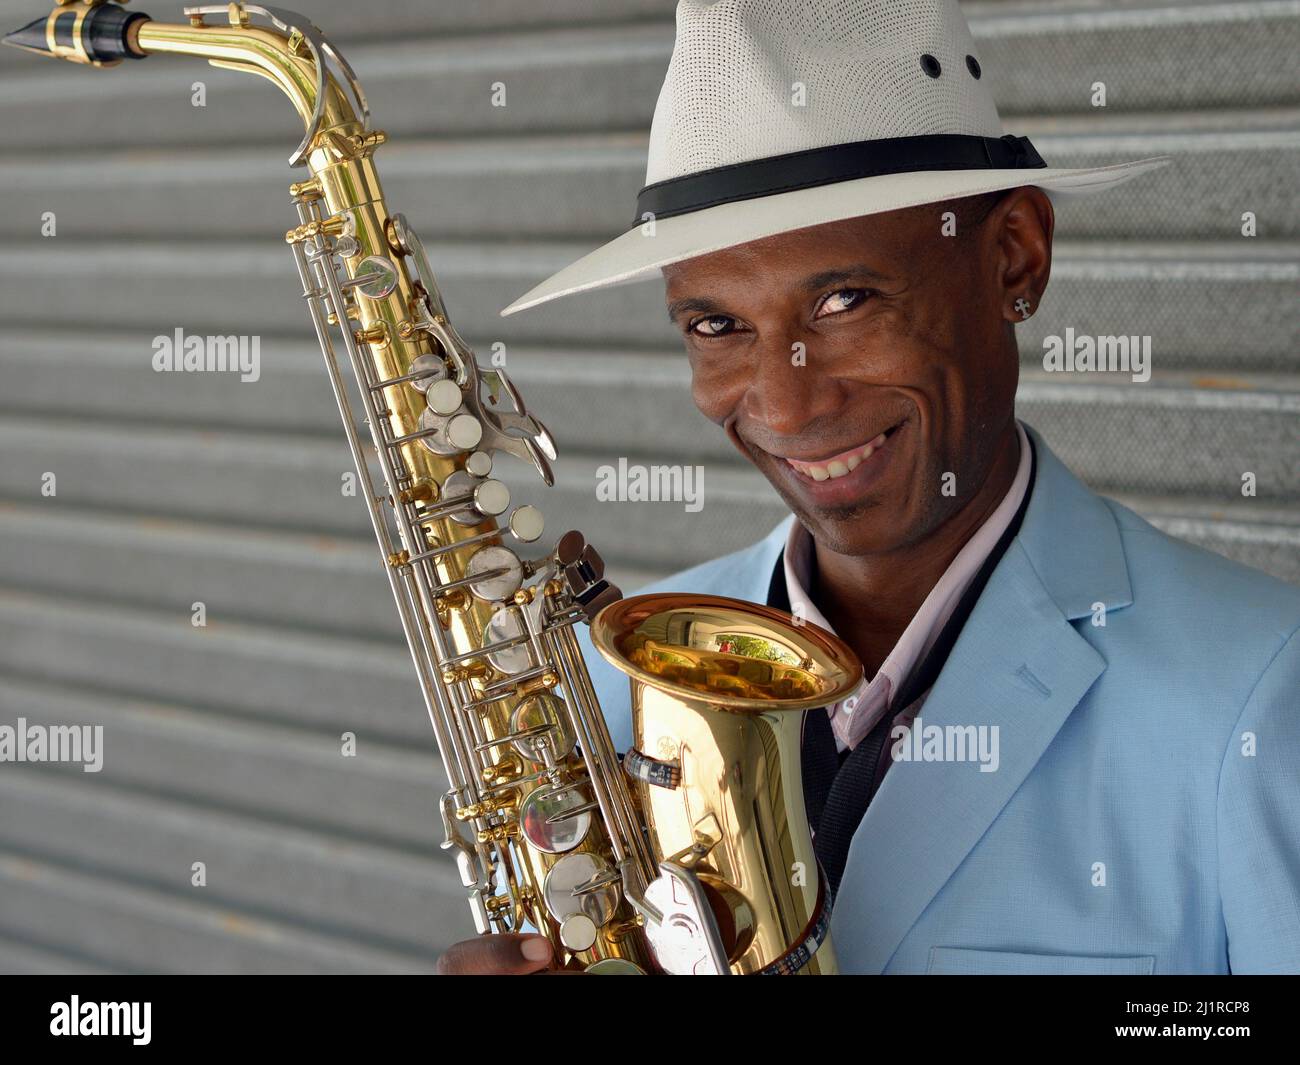 Handsome elegant young Afro-Cuban saxophonist with white Panama hat holds his shiny polished saxophone and smiles for the viewer. Stock Photo